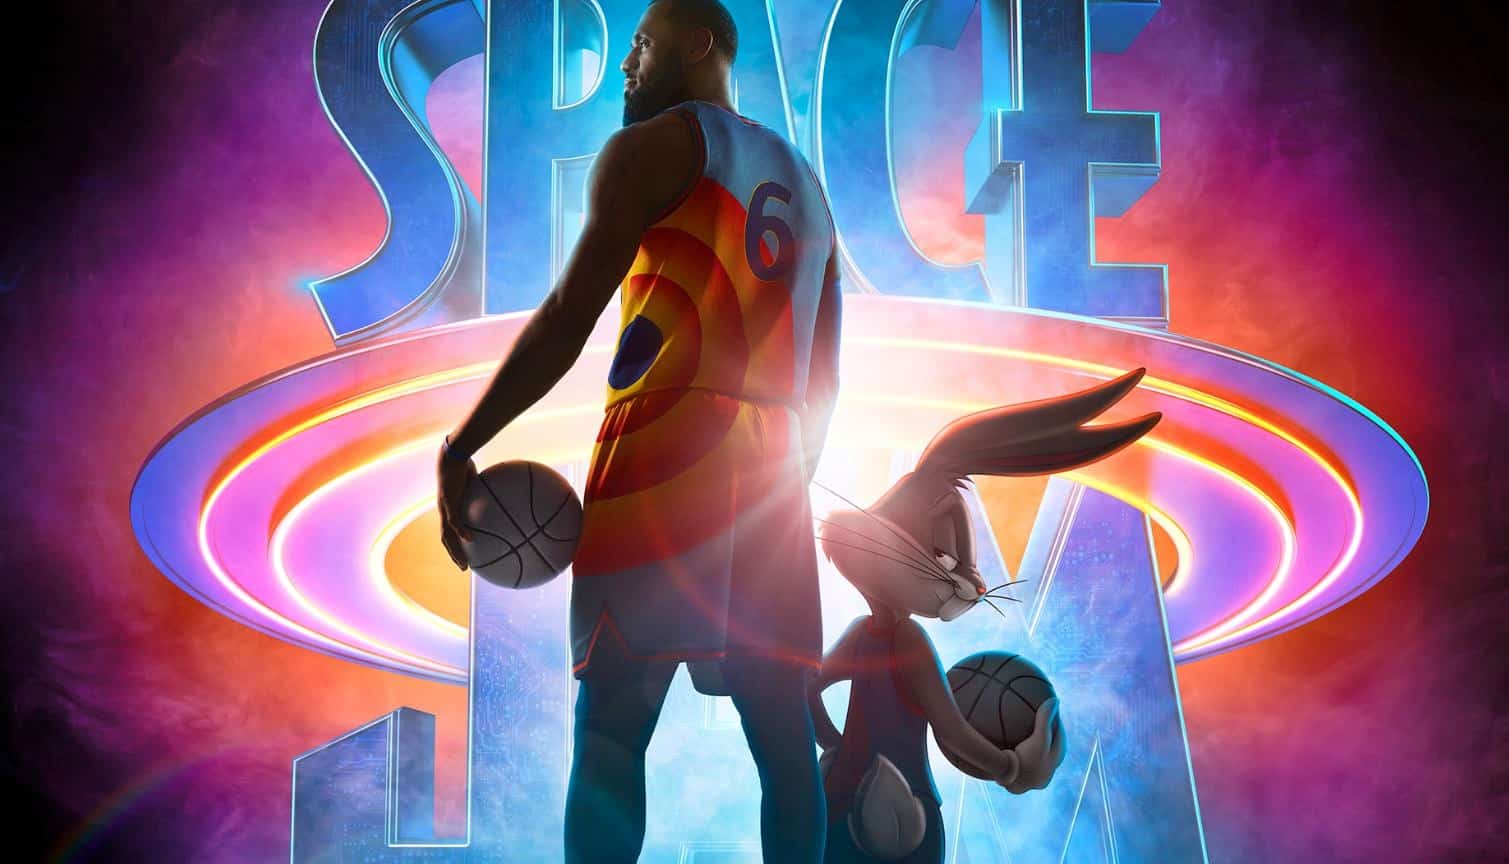 space jam: a new legacy